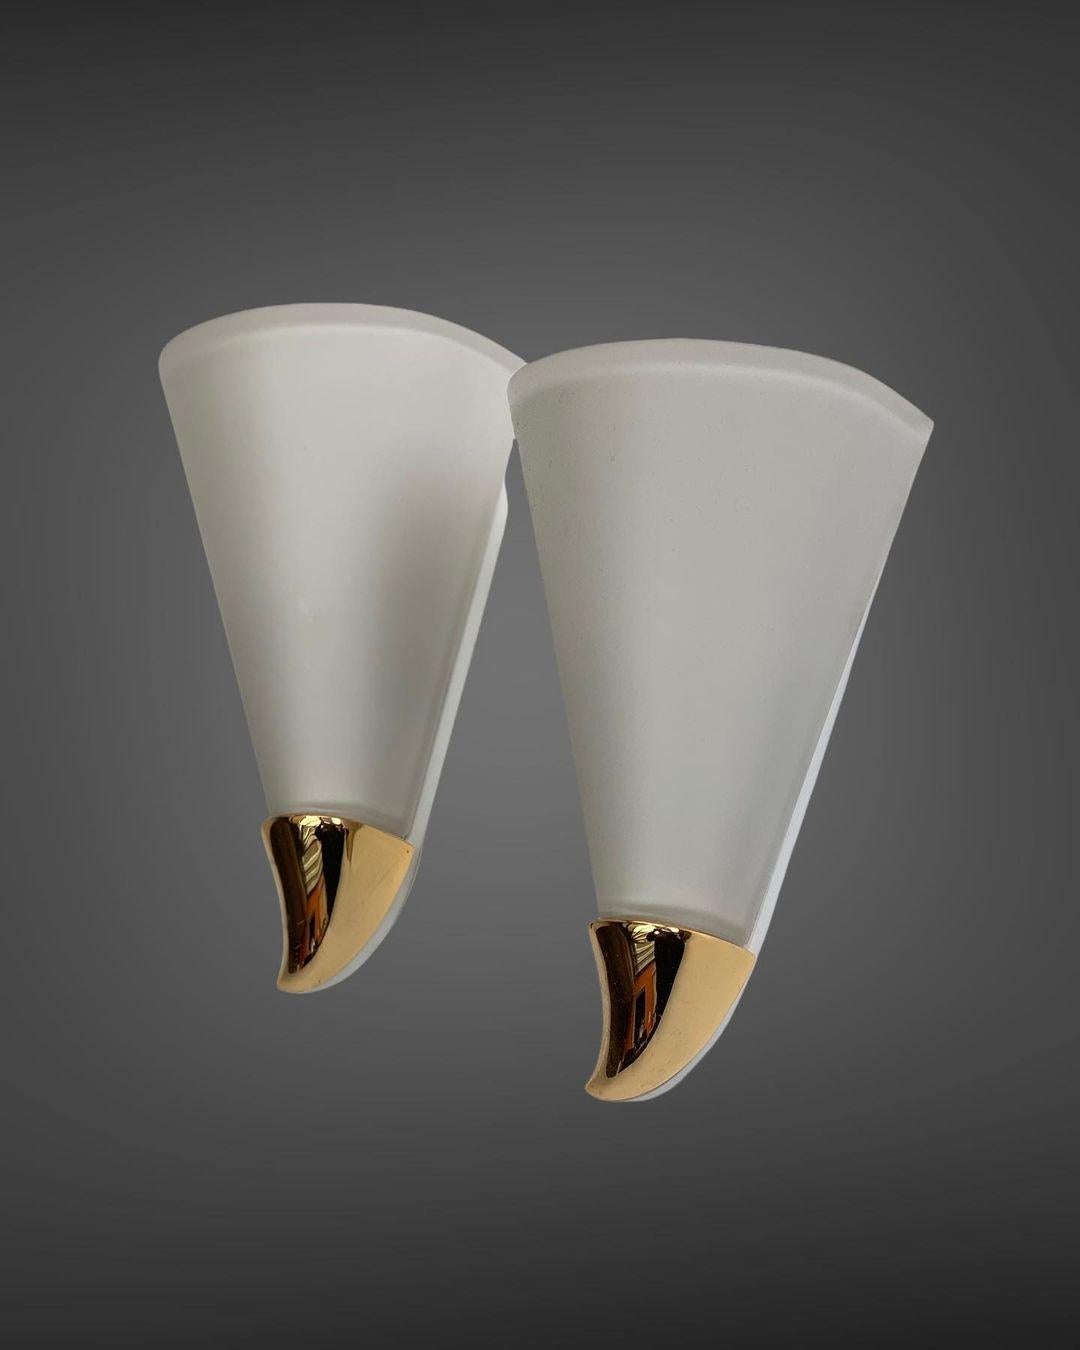 - Pair of sconces from the Belgian company Deknudt
- Well suited for the bathrooms
- Made of opaline glass and brass
- Circa 2000s.